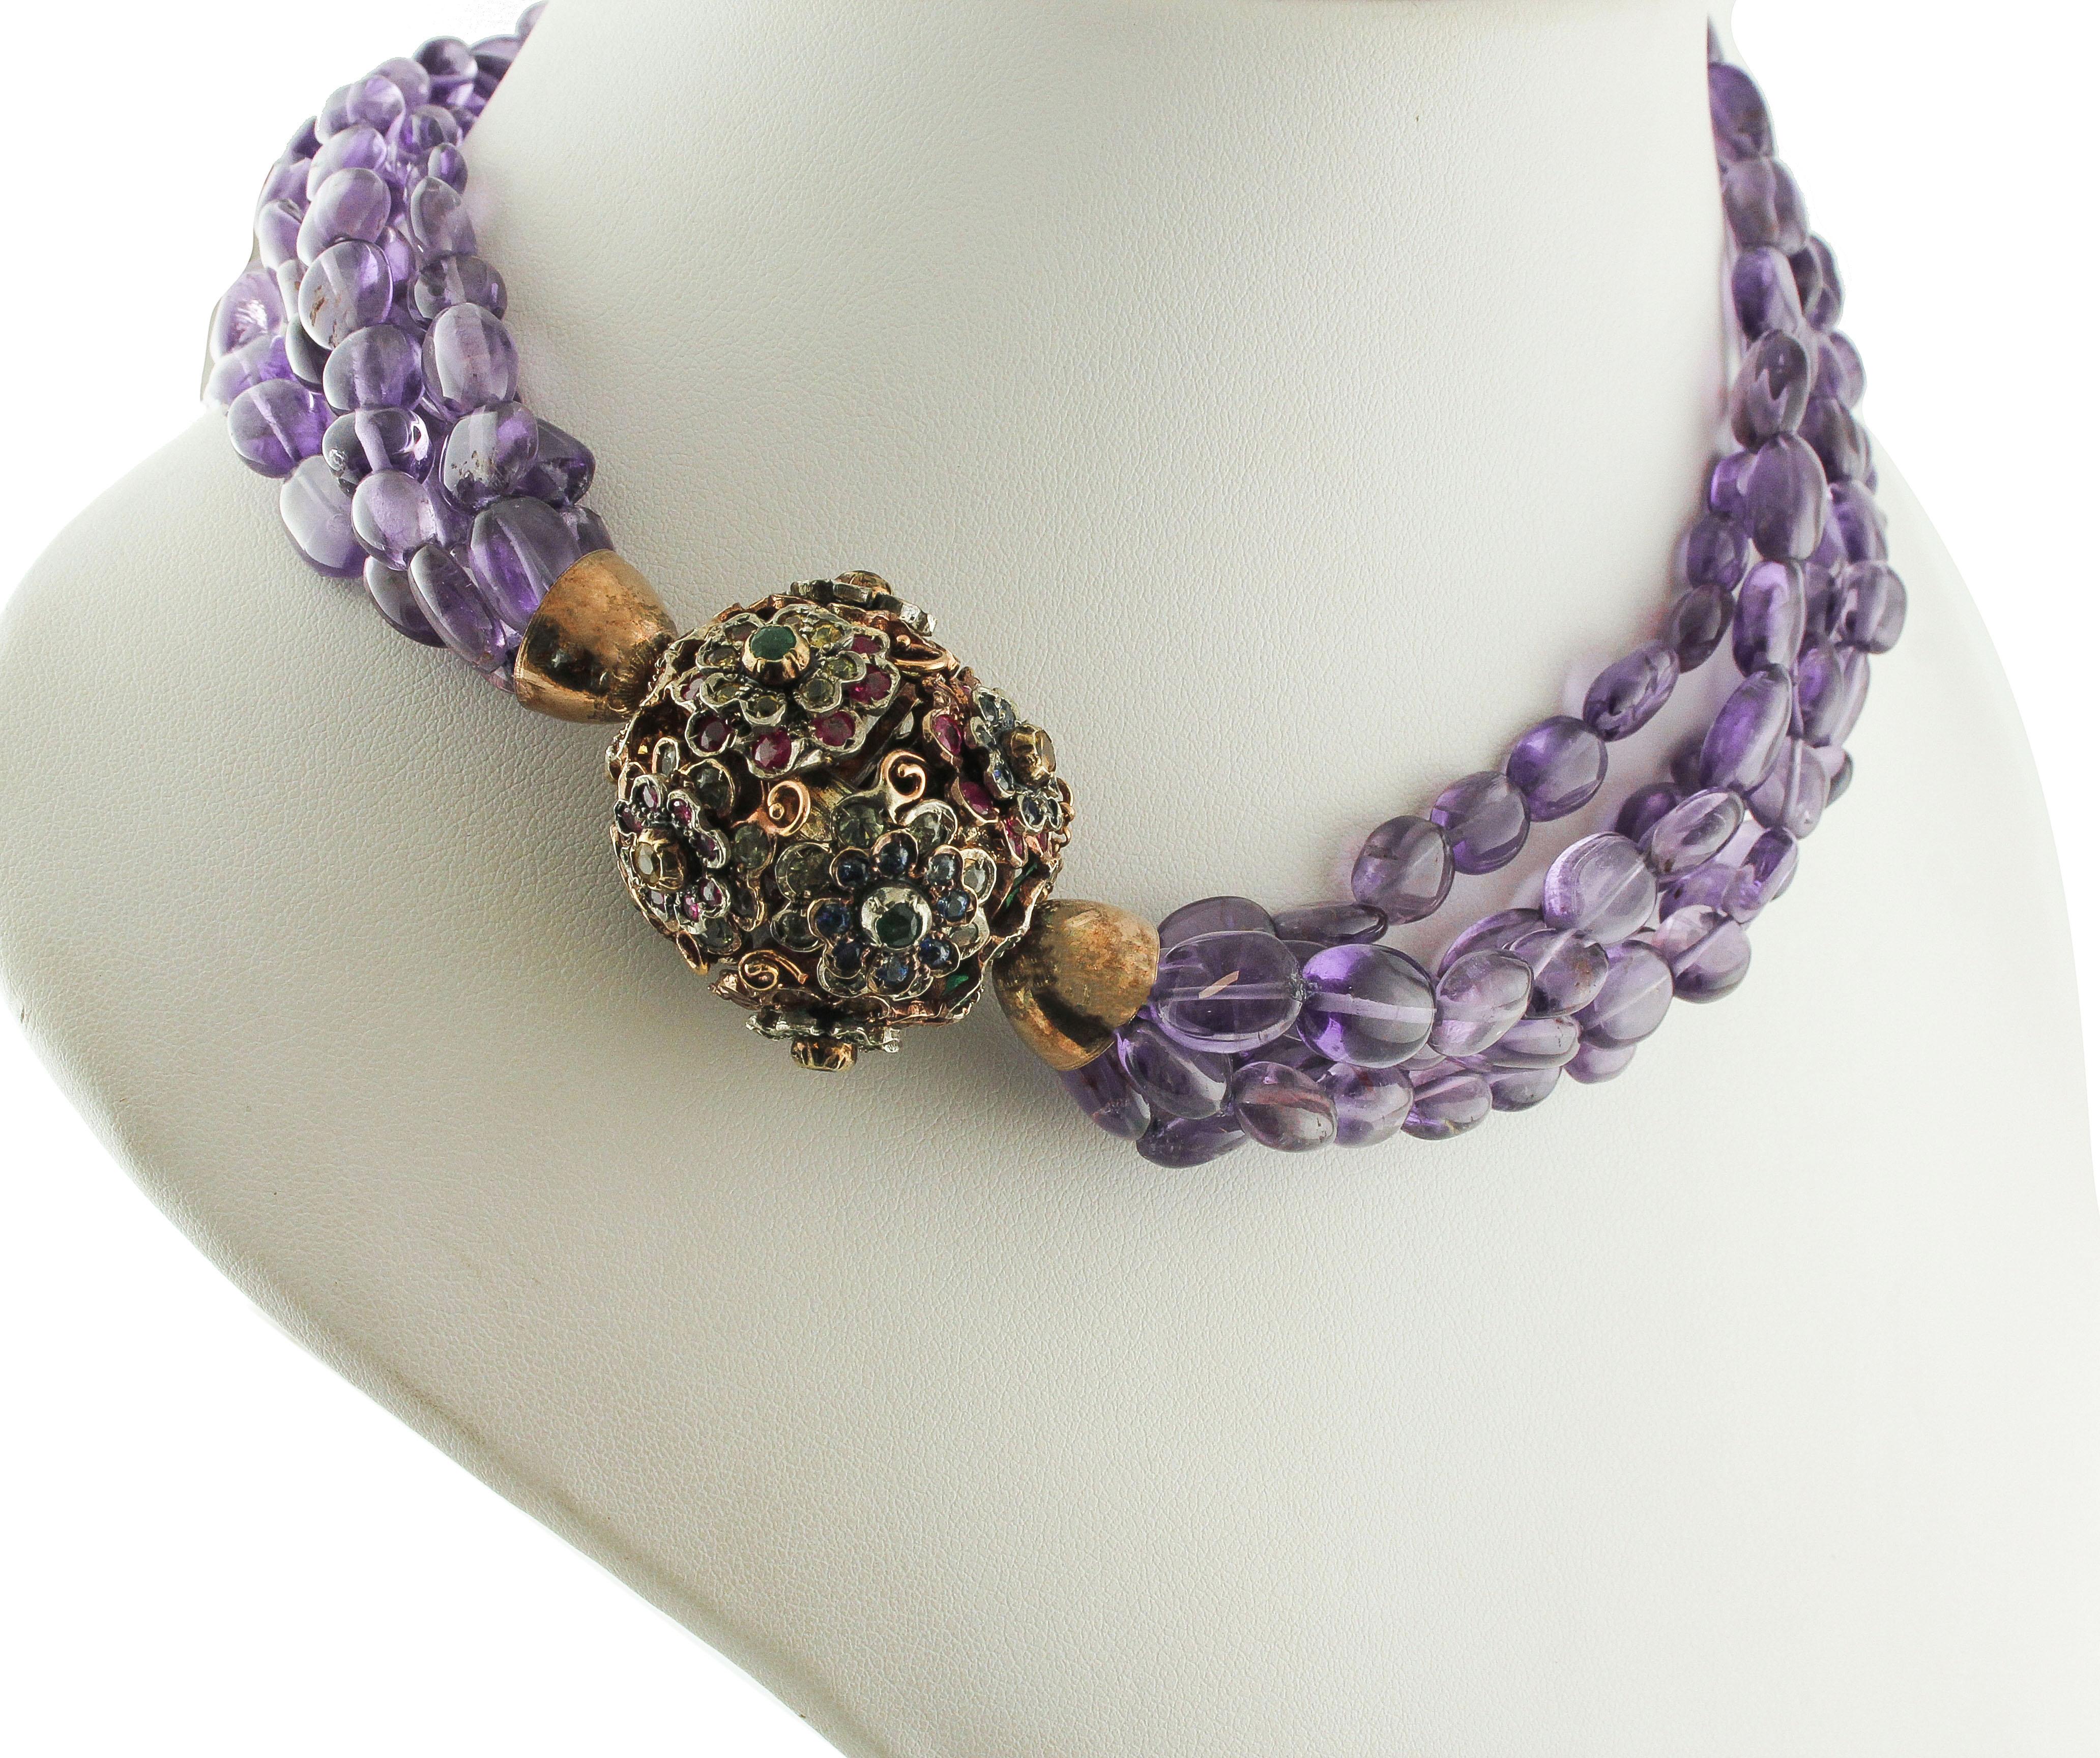 Women's Retro Intertwined Amethysts Necklace, with Emeralds, Rubies and Sapphires Clasp For Sale